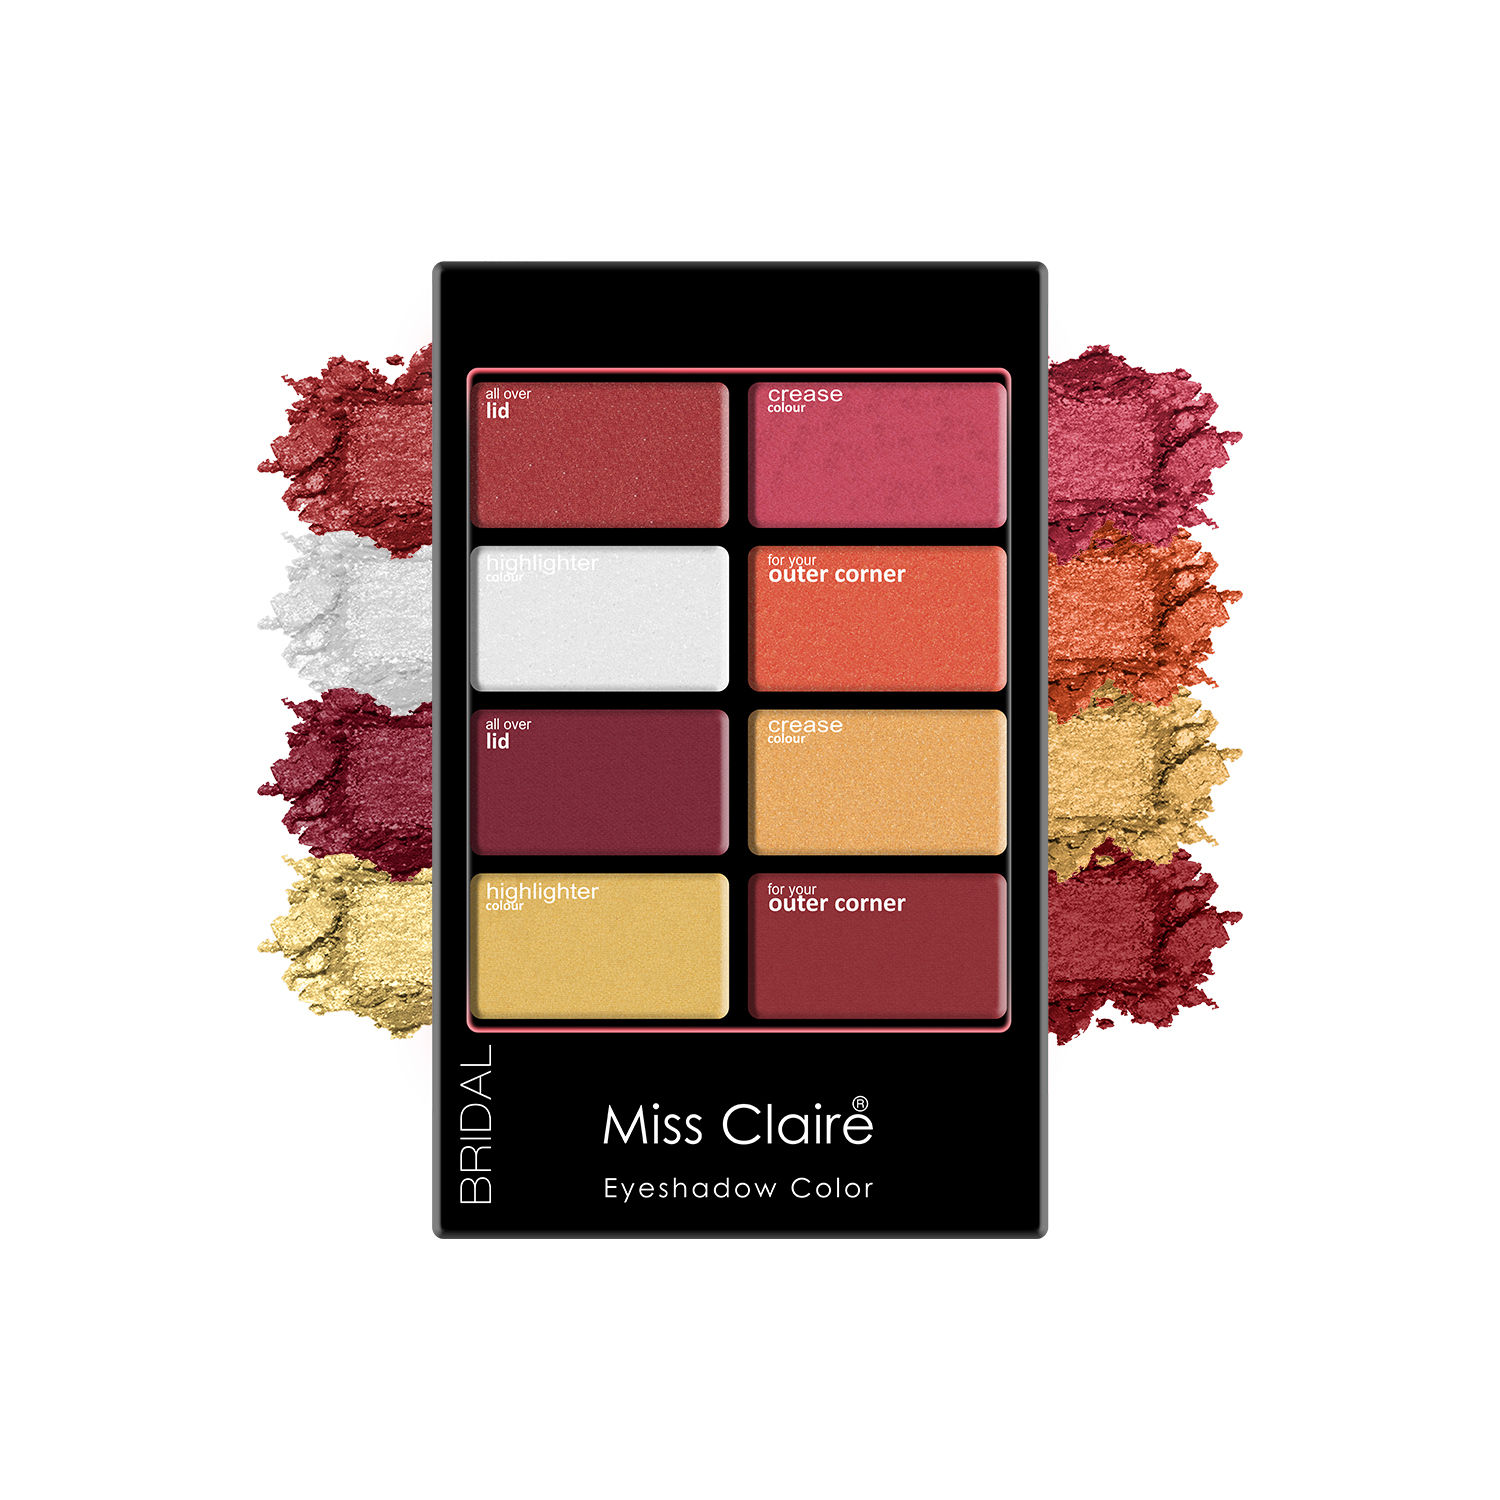 Miss Claire Eyeshadow Color - Bridal